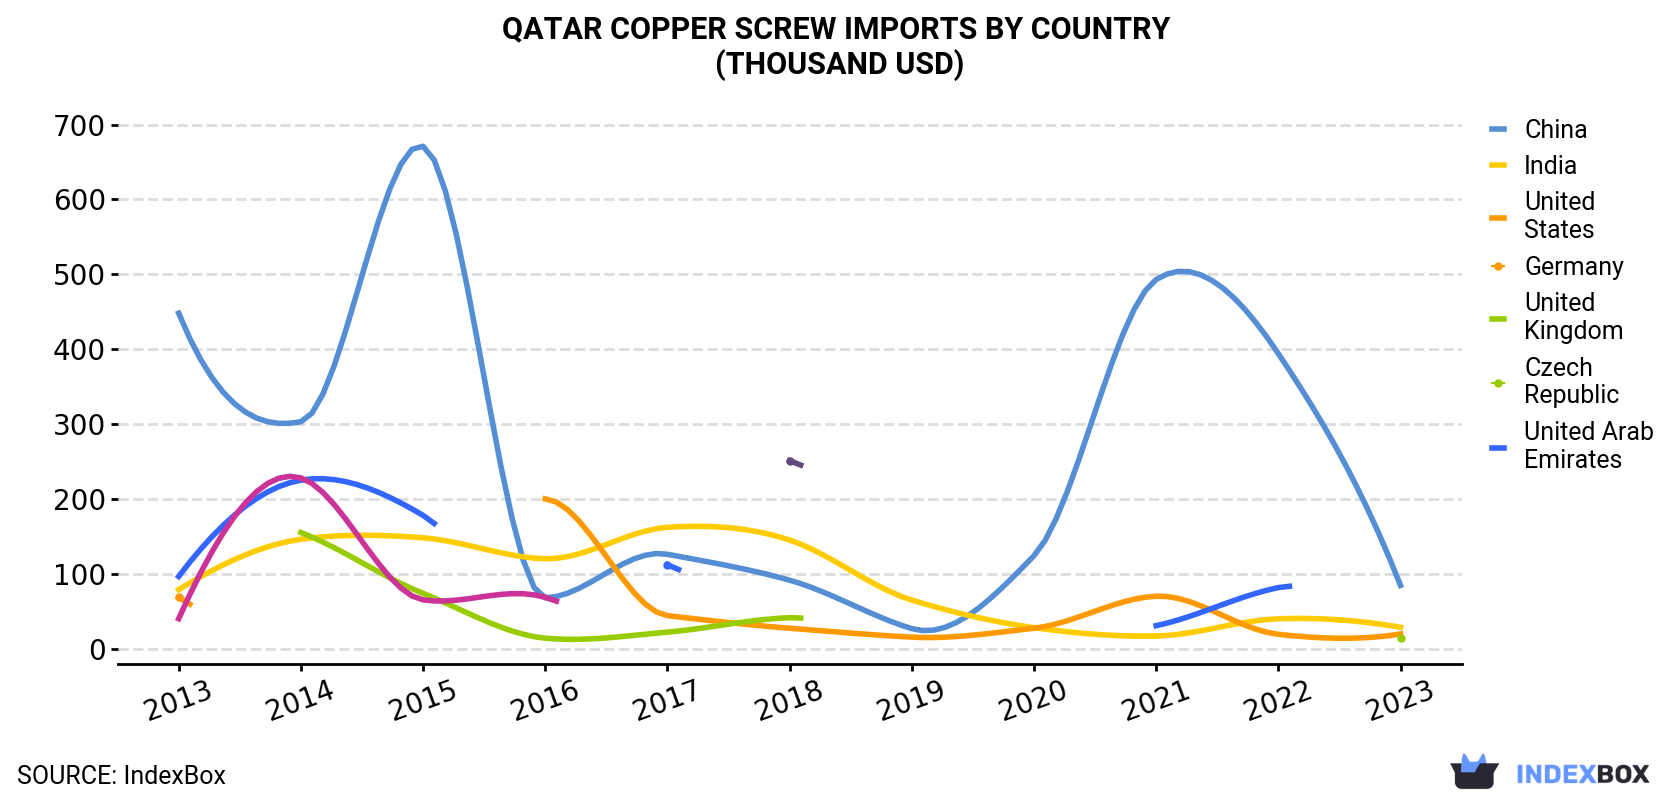 Qatar Copper Screw Imports By Country (Thousand USD)